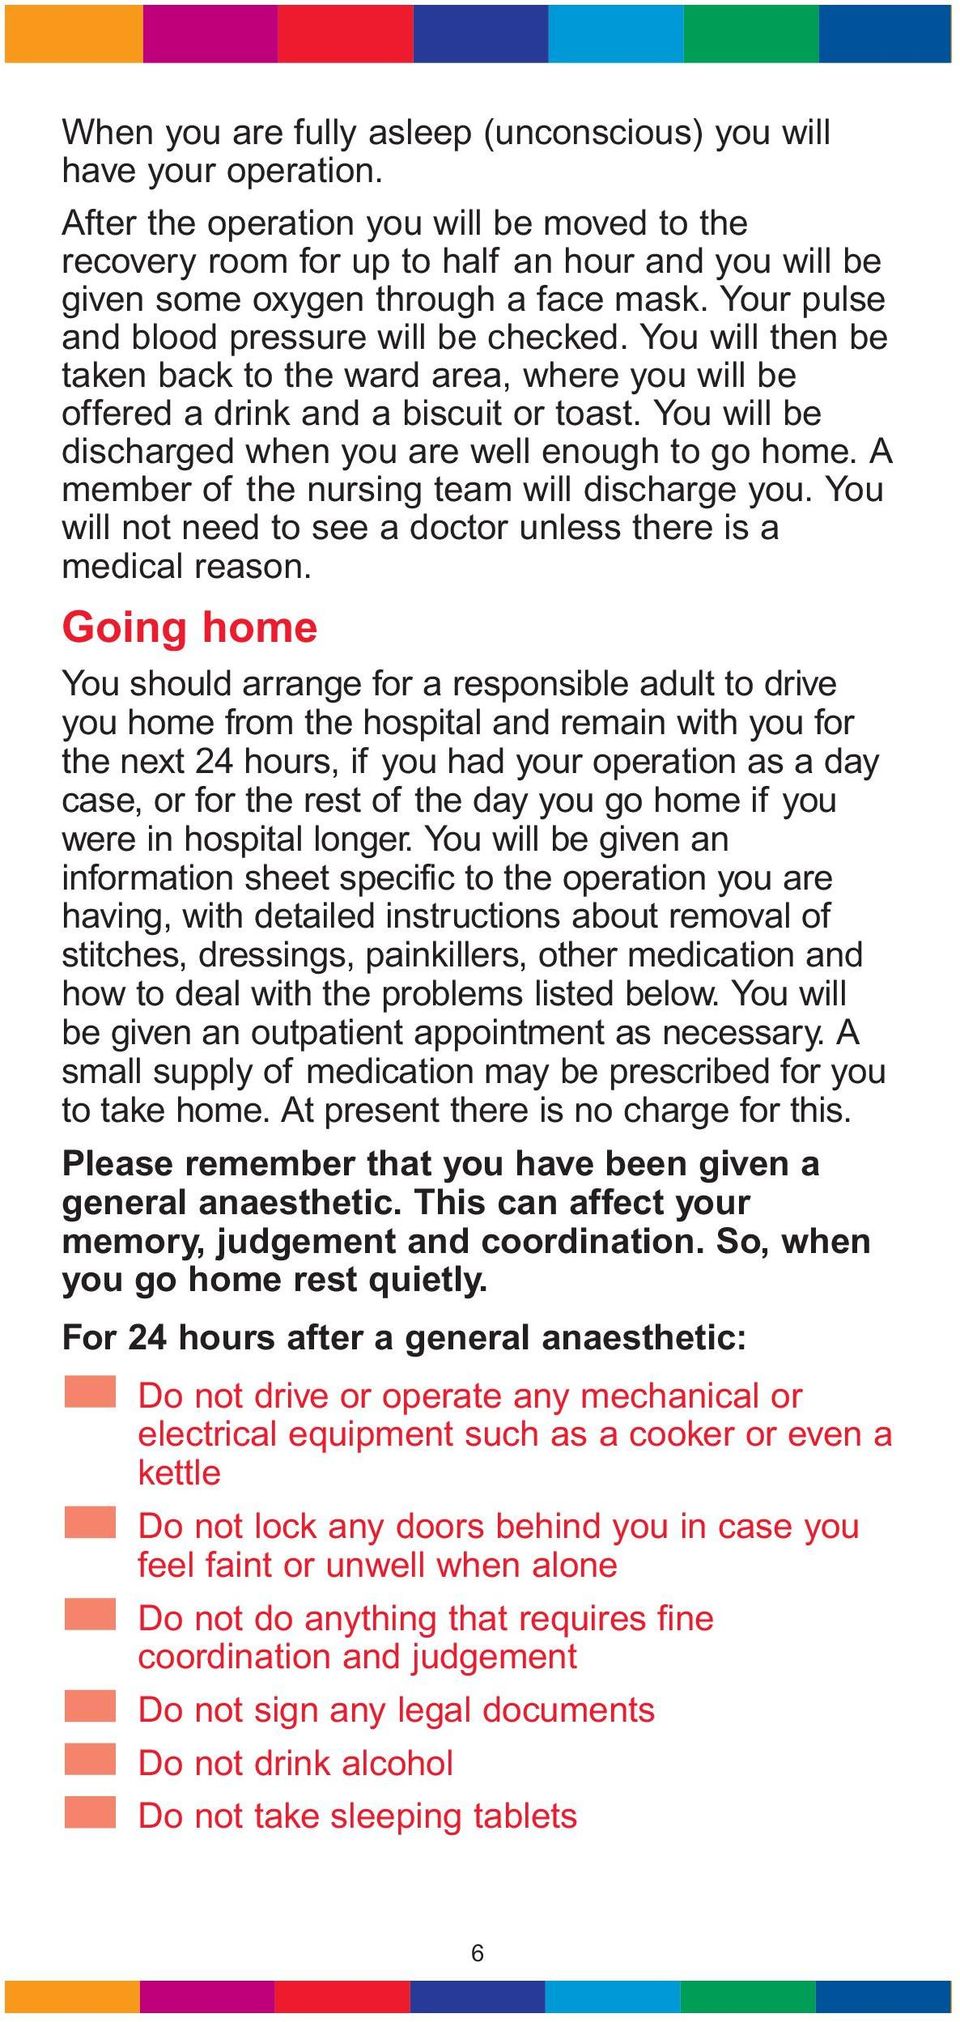 You will then be taken back to the ward area, where you will be offered a drink and a biscuit or toast. You will be discharged when you are well enough to go home.